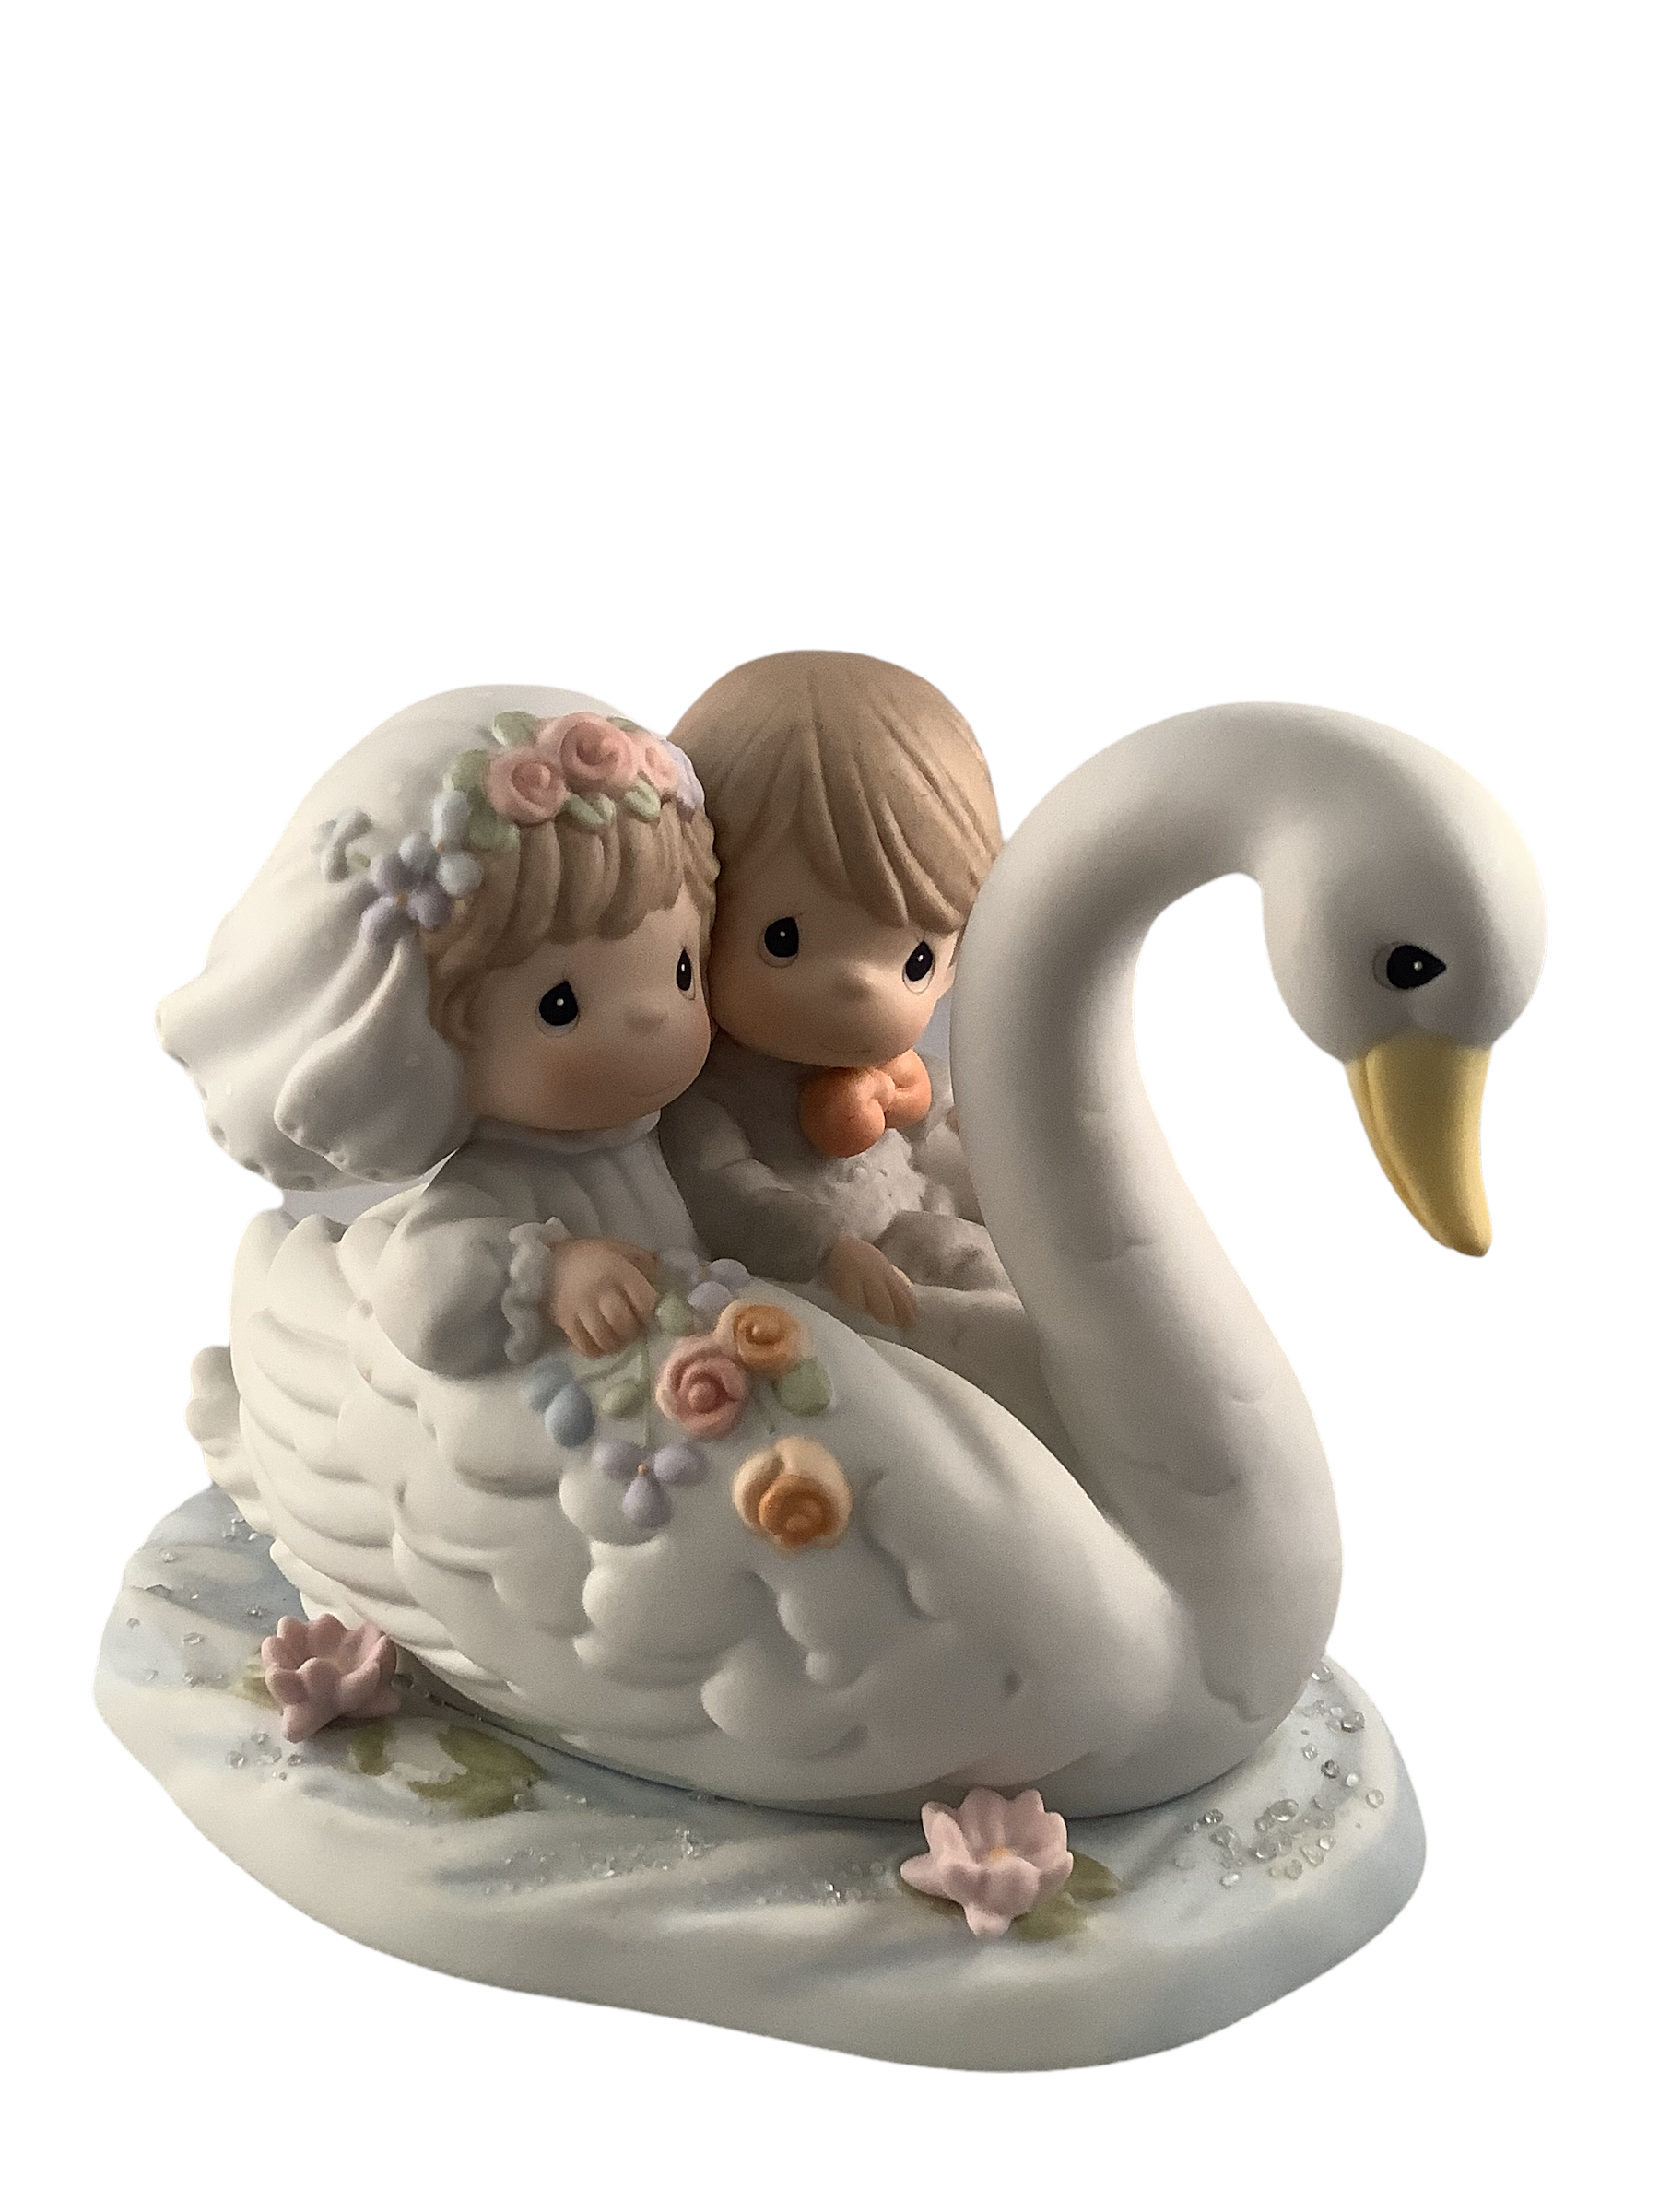 Our Love Will Flow Eternal  - Precious Moment Figurine